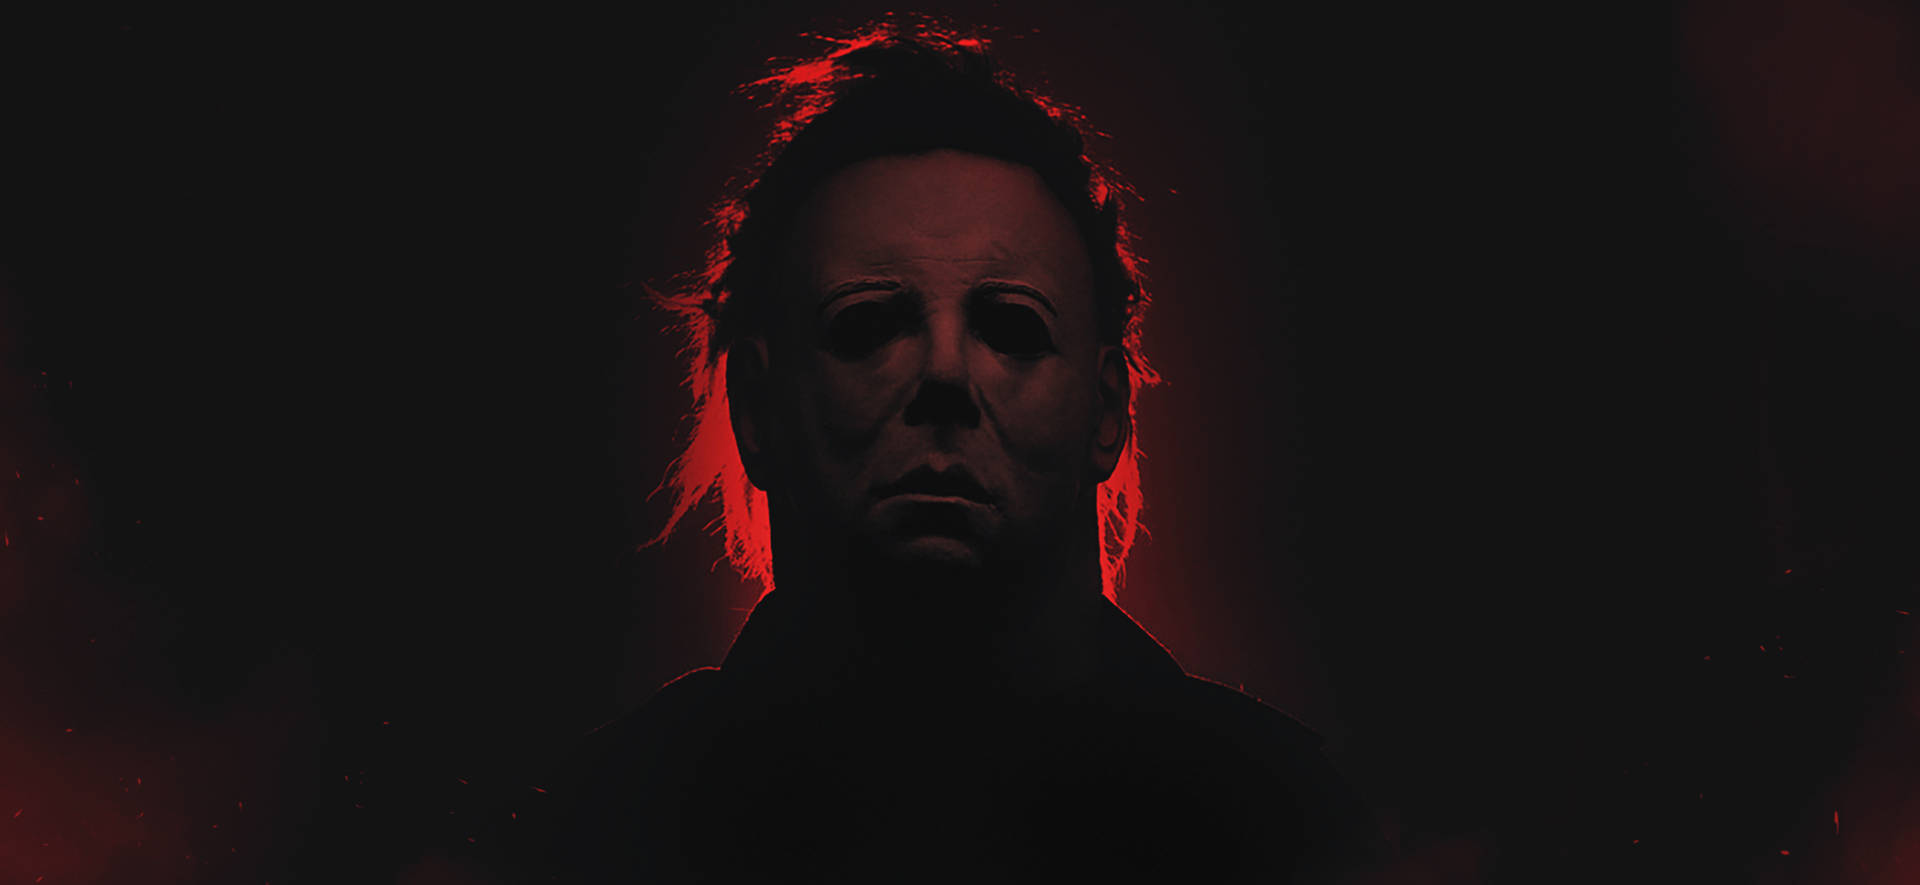 Top 999+ Michael Myers Wallpaper Full HD, 4K✅Free to Use